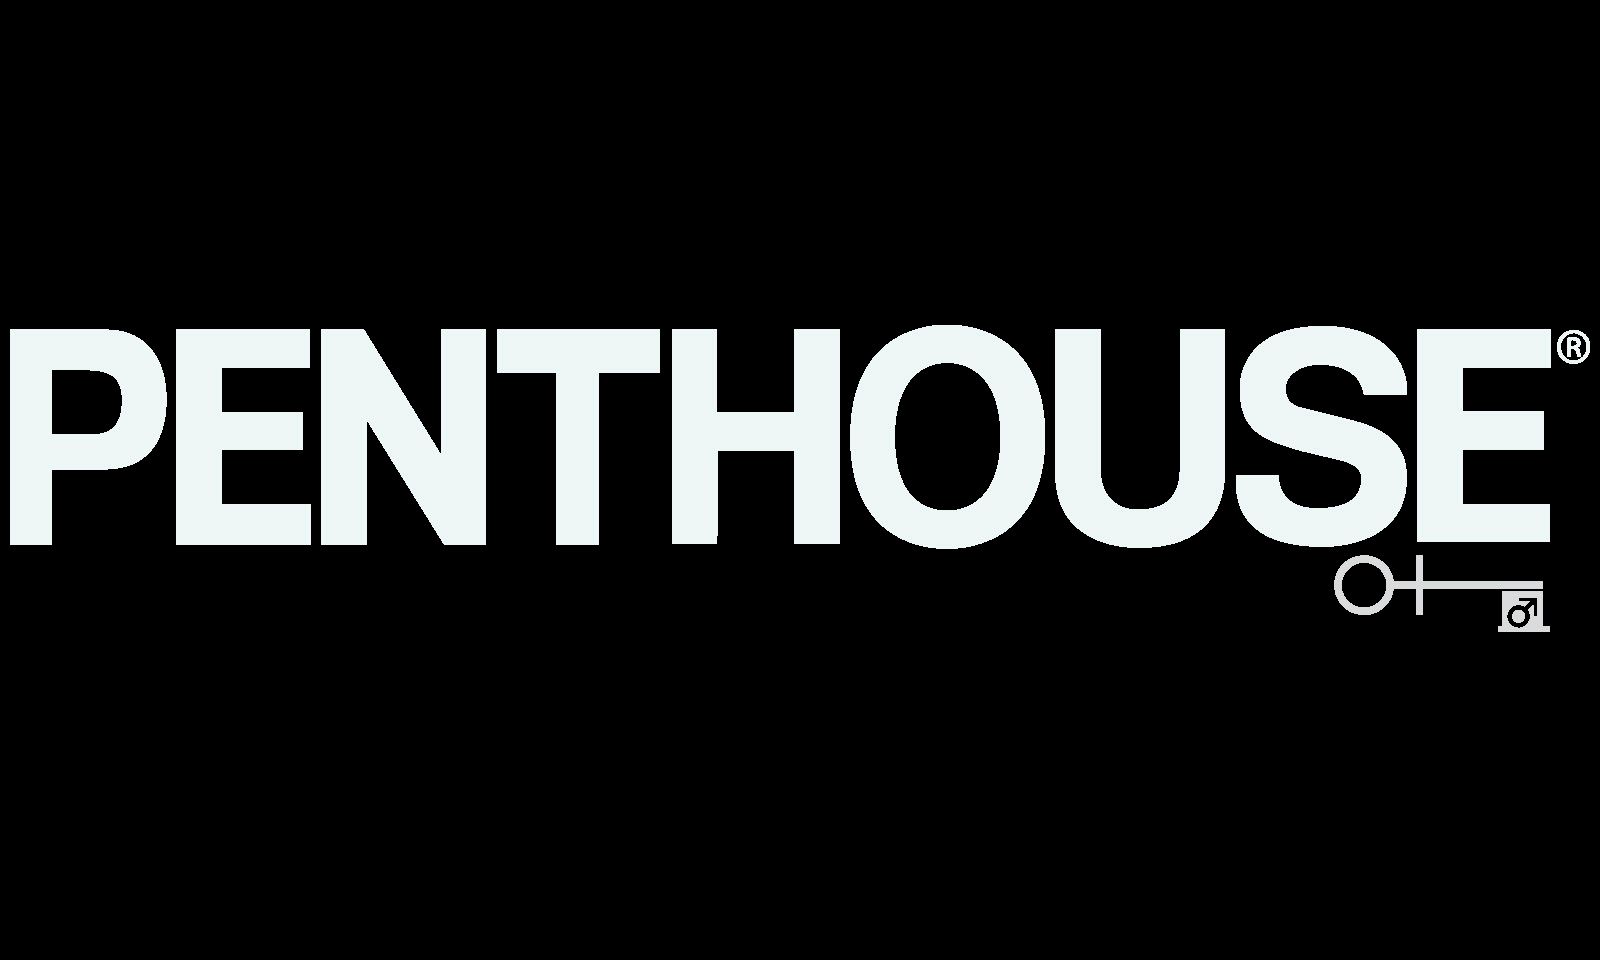 What Do Women Want? Penthouse Tells All in Two New Releases